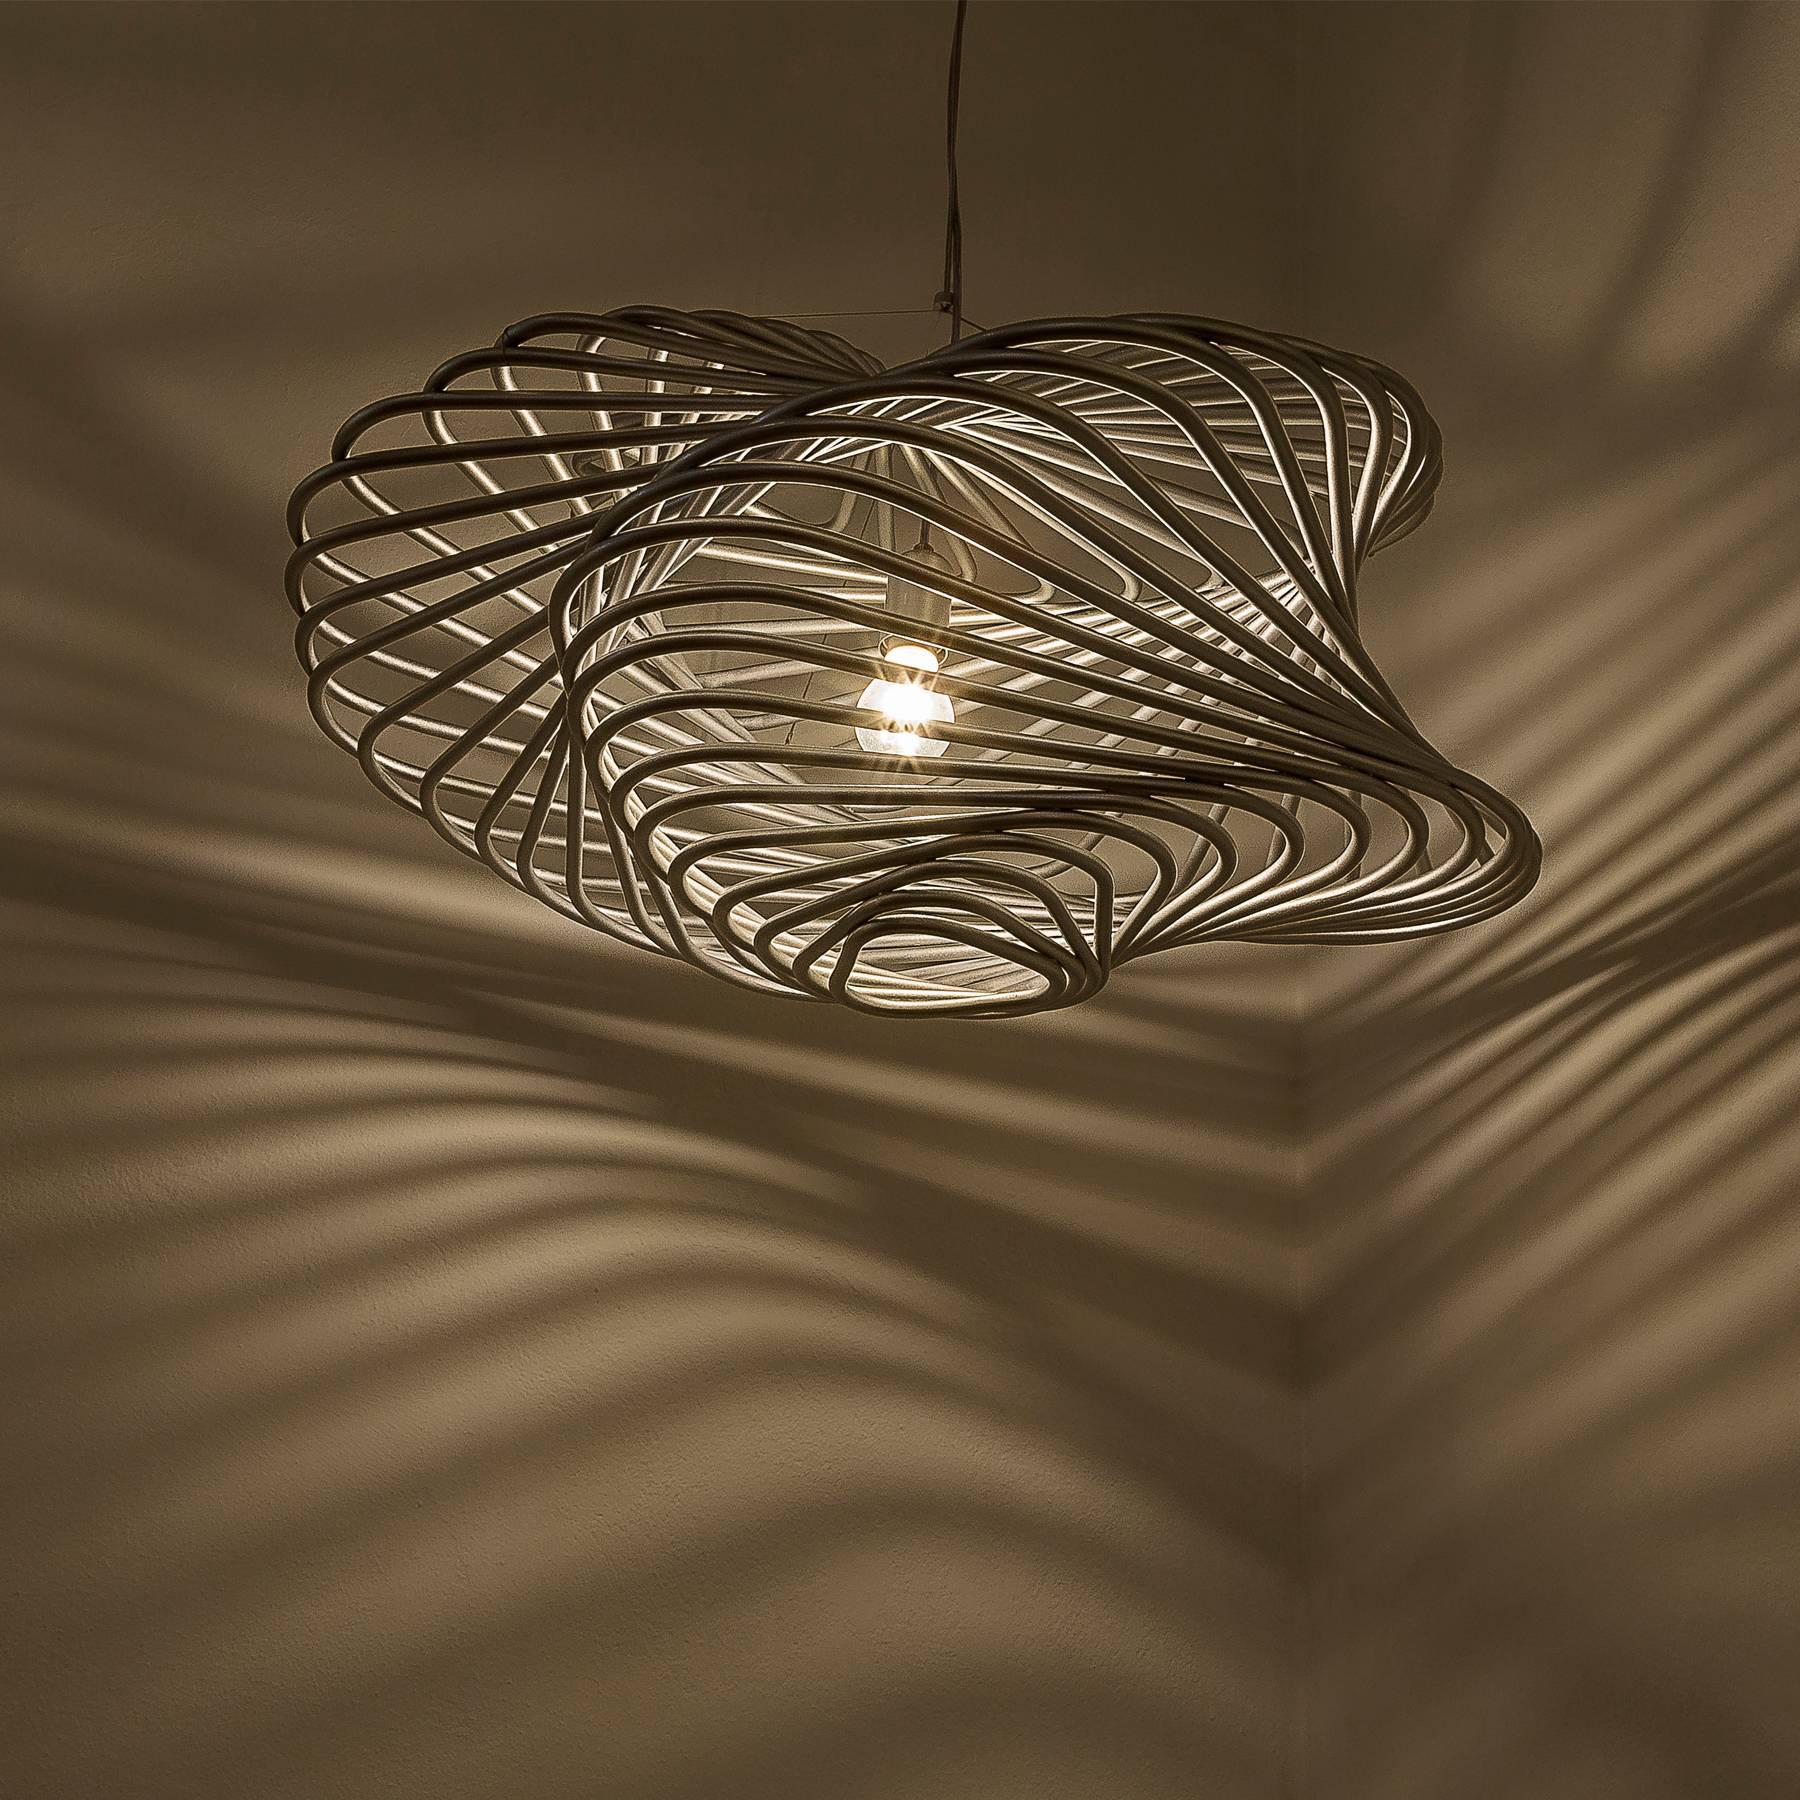 The c.as ceiling light or pendant lamp, is based on 